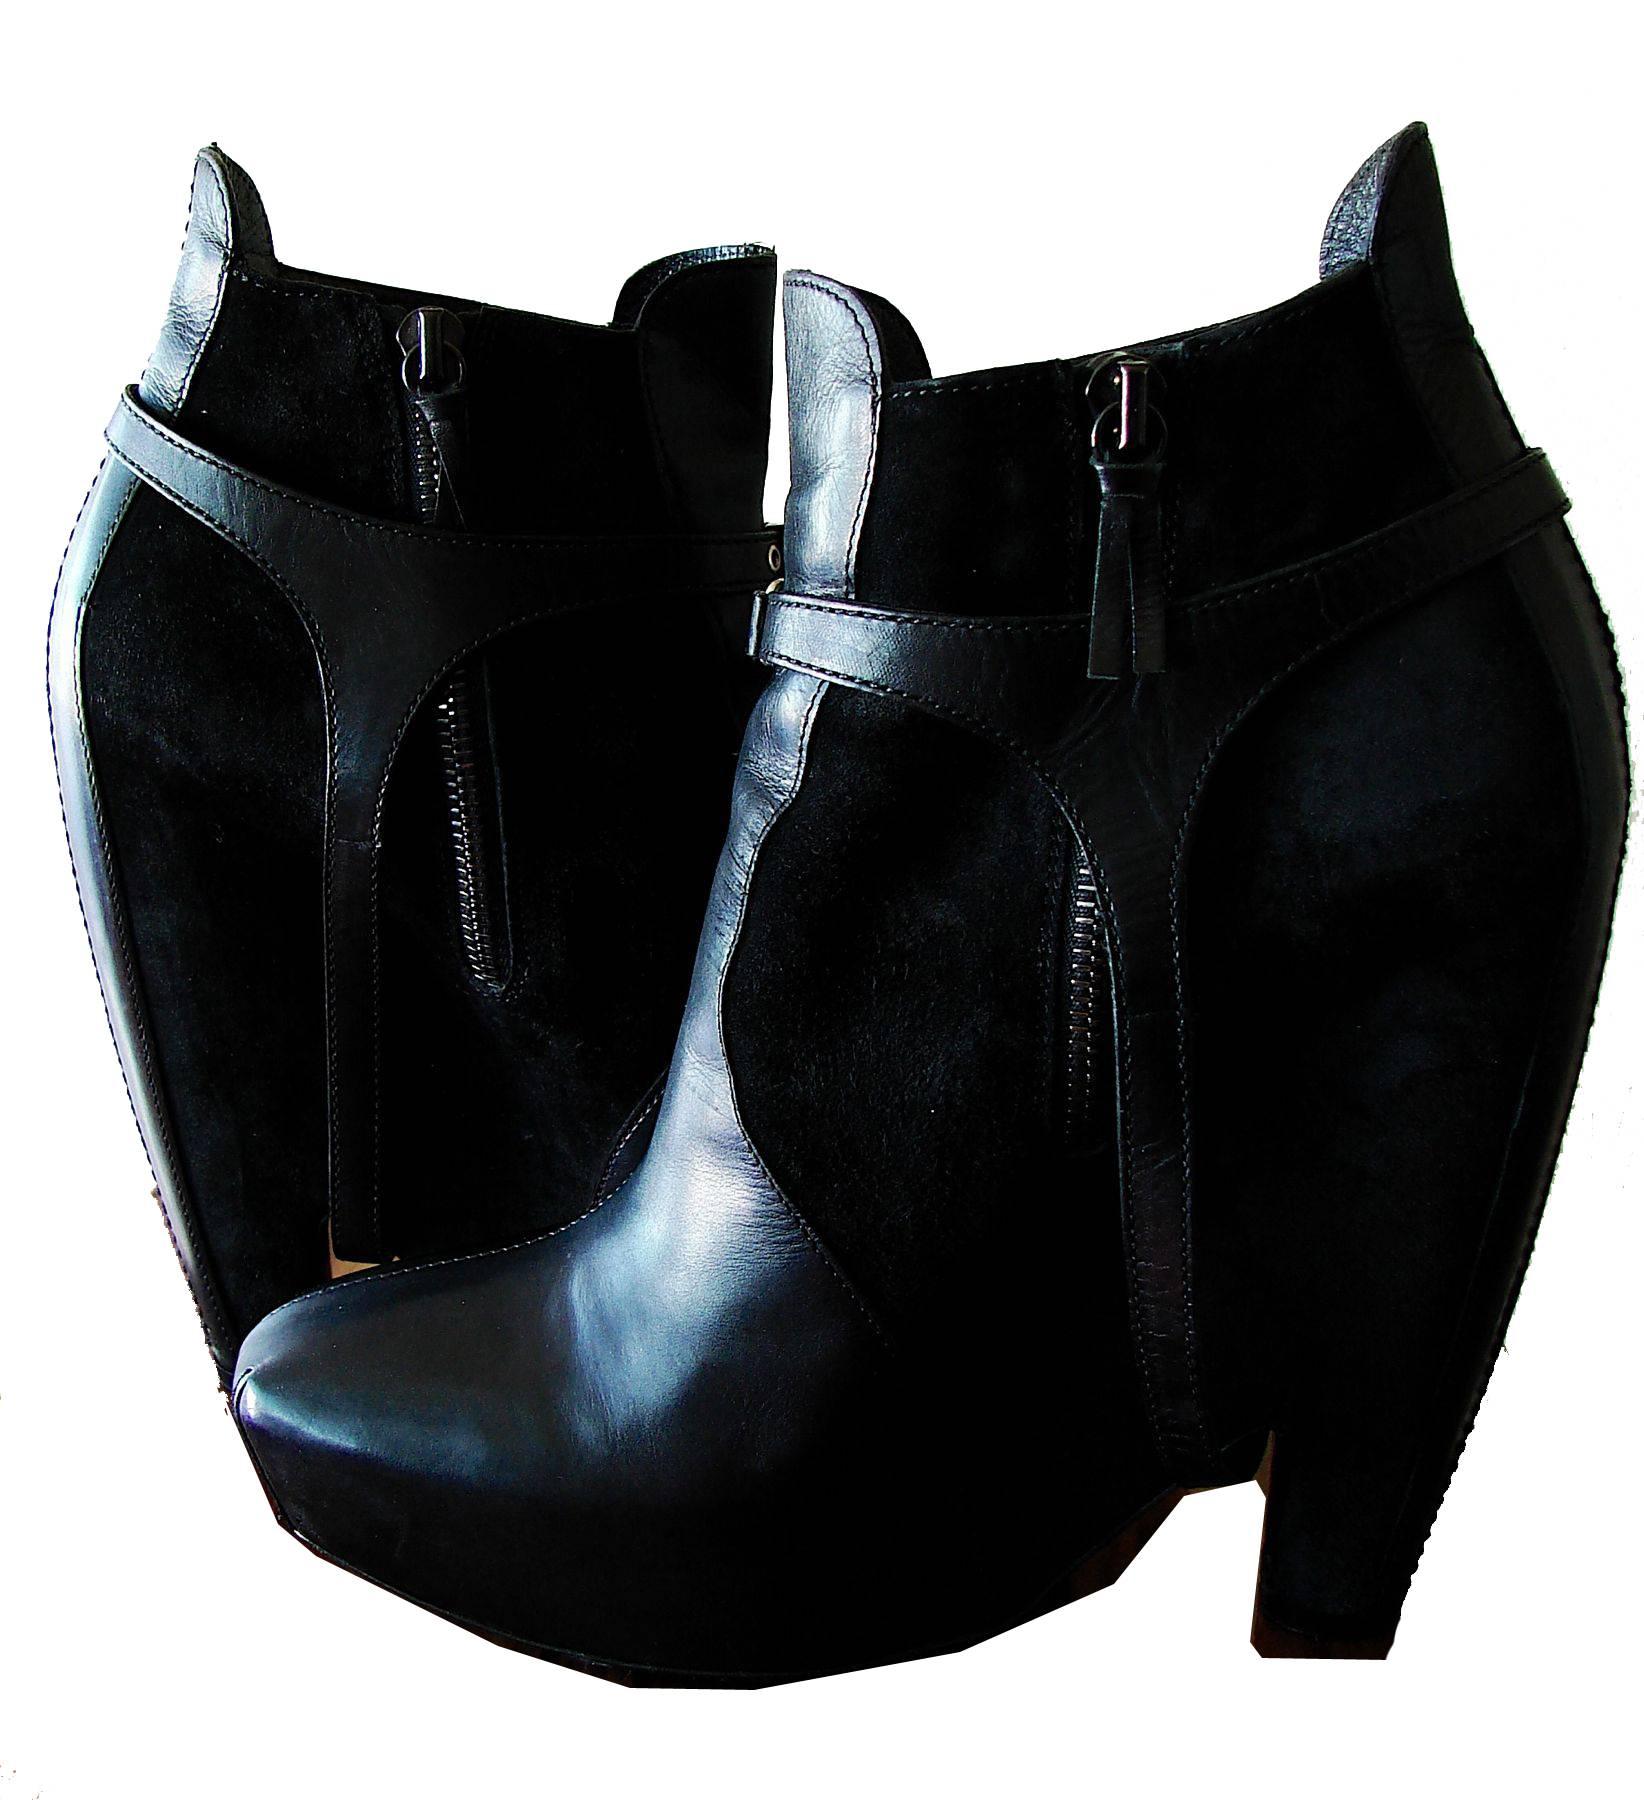 These short platform boots from Balenciaga were part of the 2006 collection and sold out quickly.  Made from black calfskin leather and suede, they feature a removable leather harness, side zipper, a 2